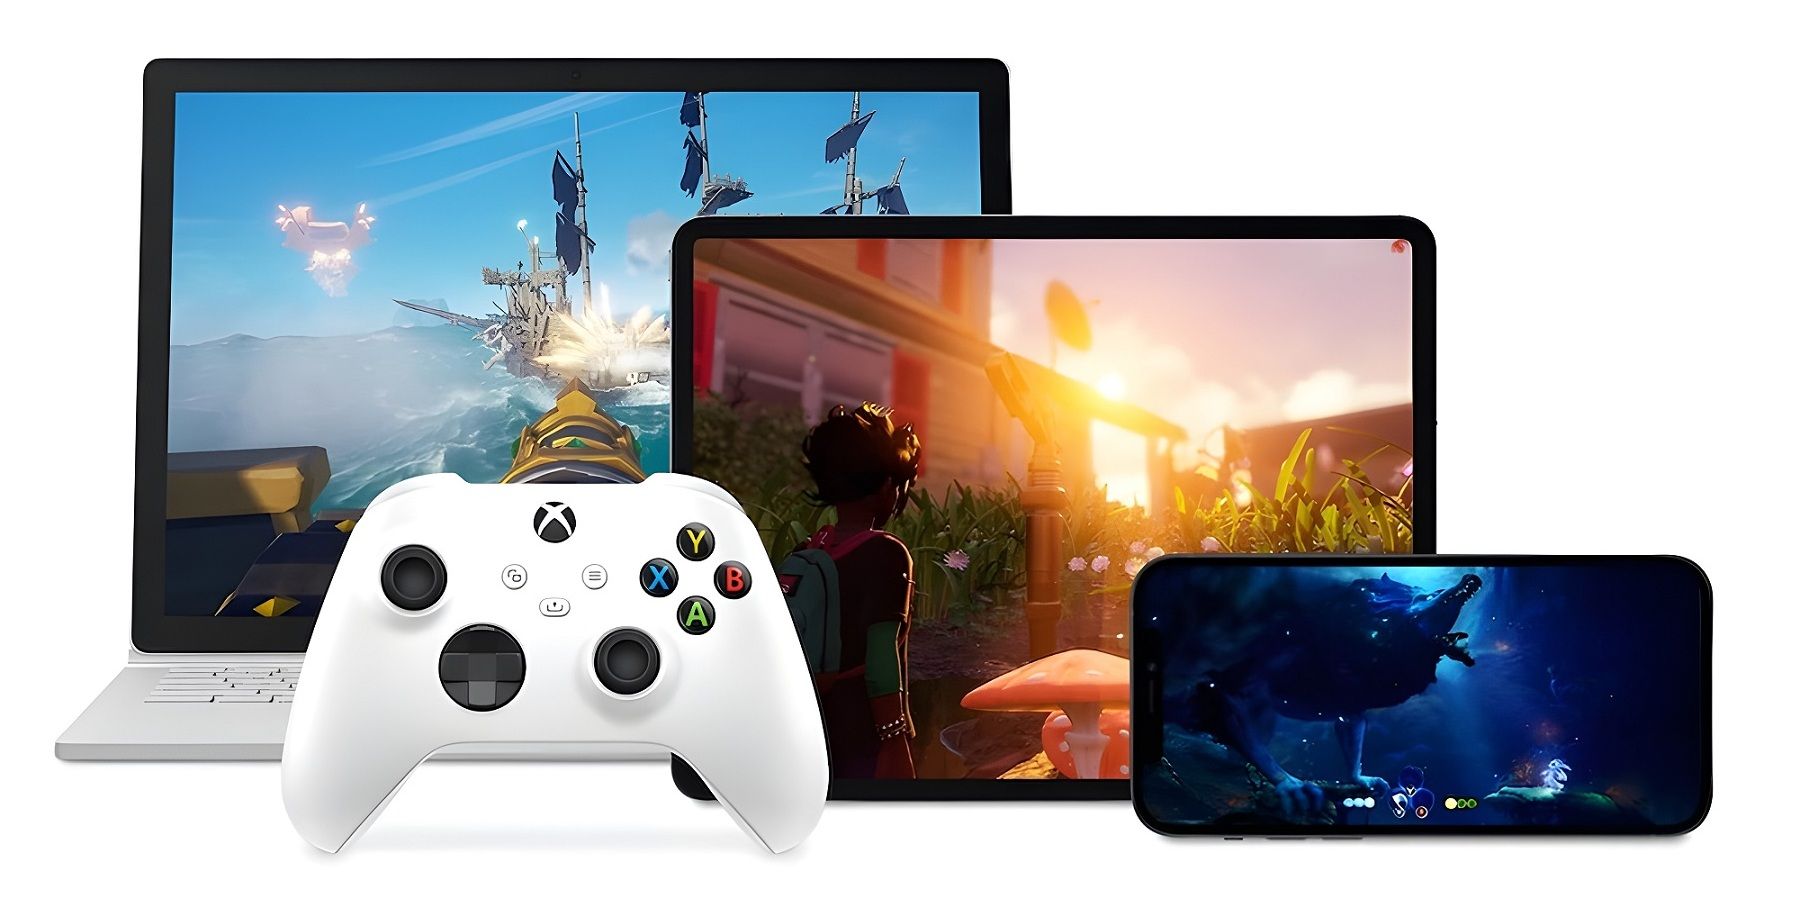 Xbox app for smart TVs will let you play games without a console